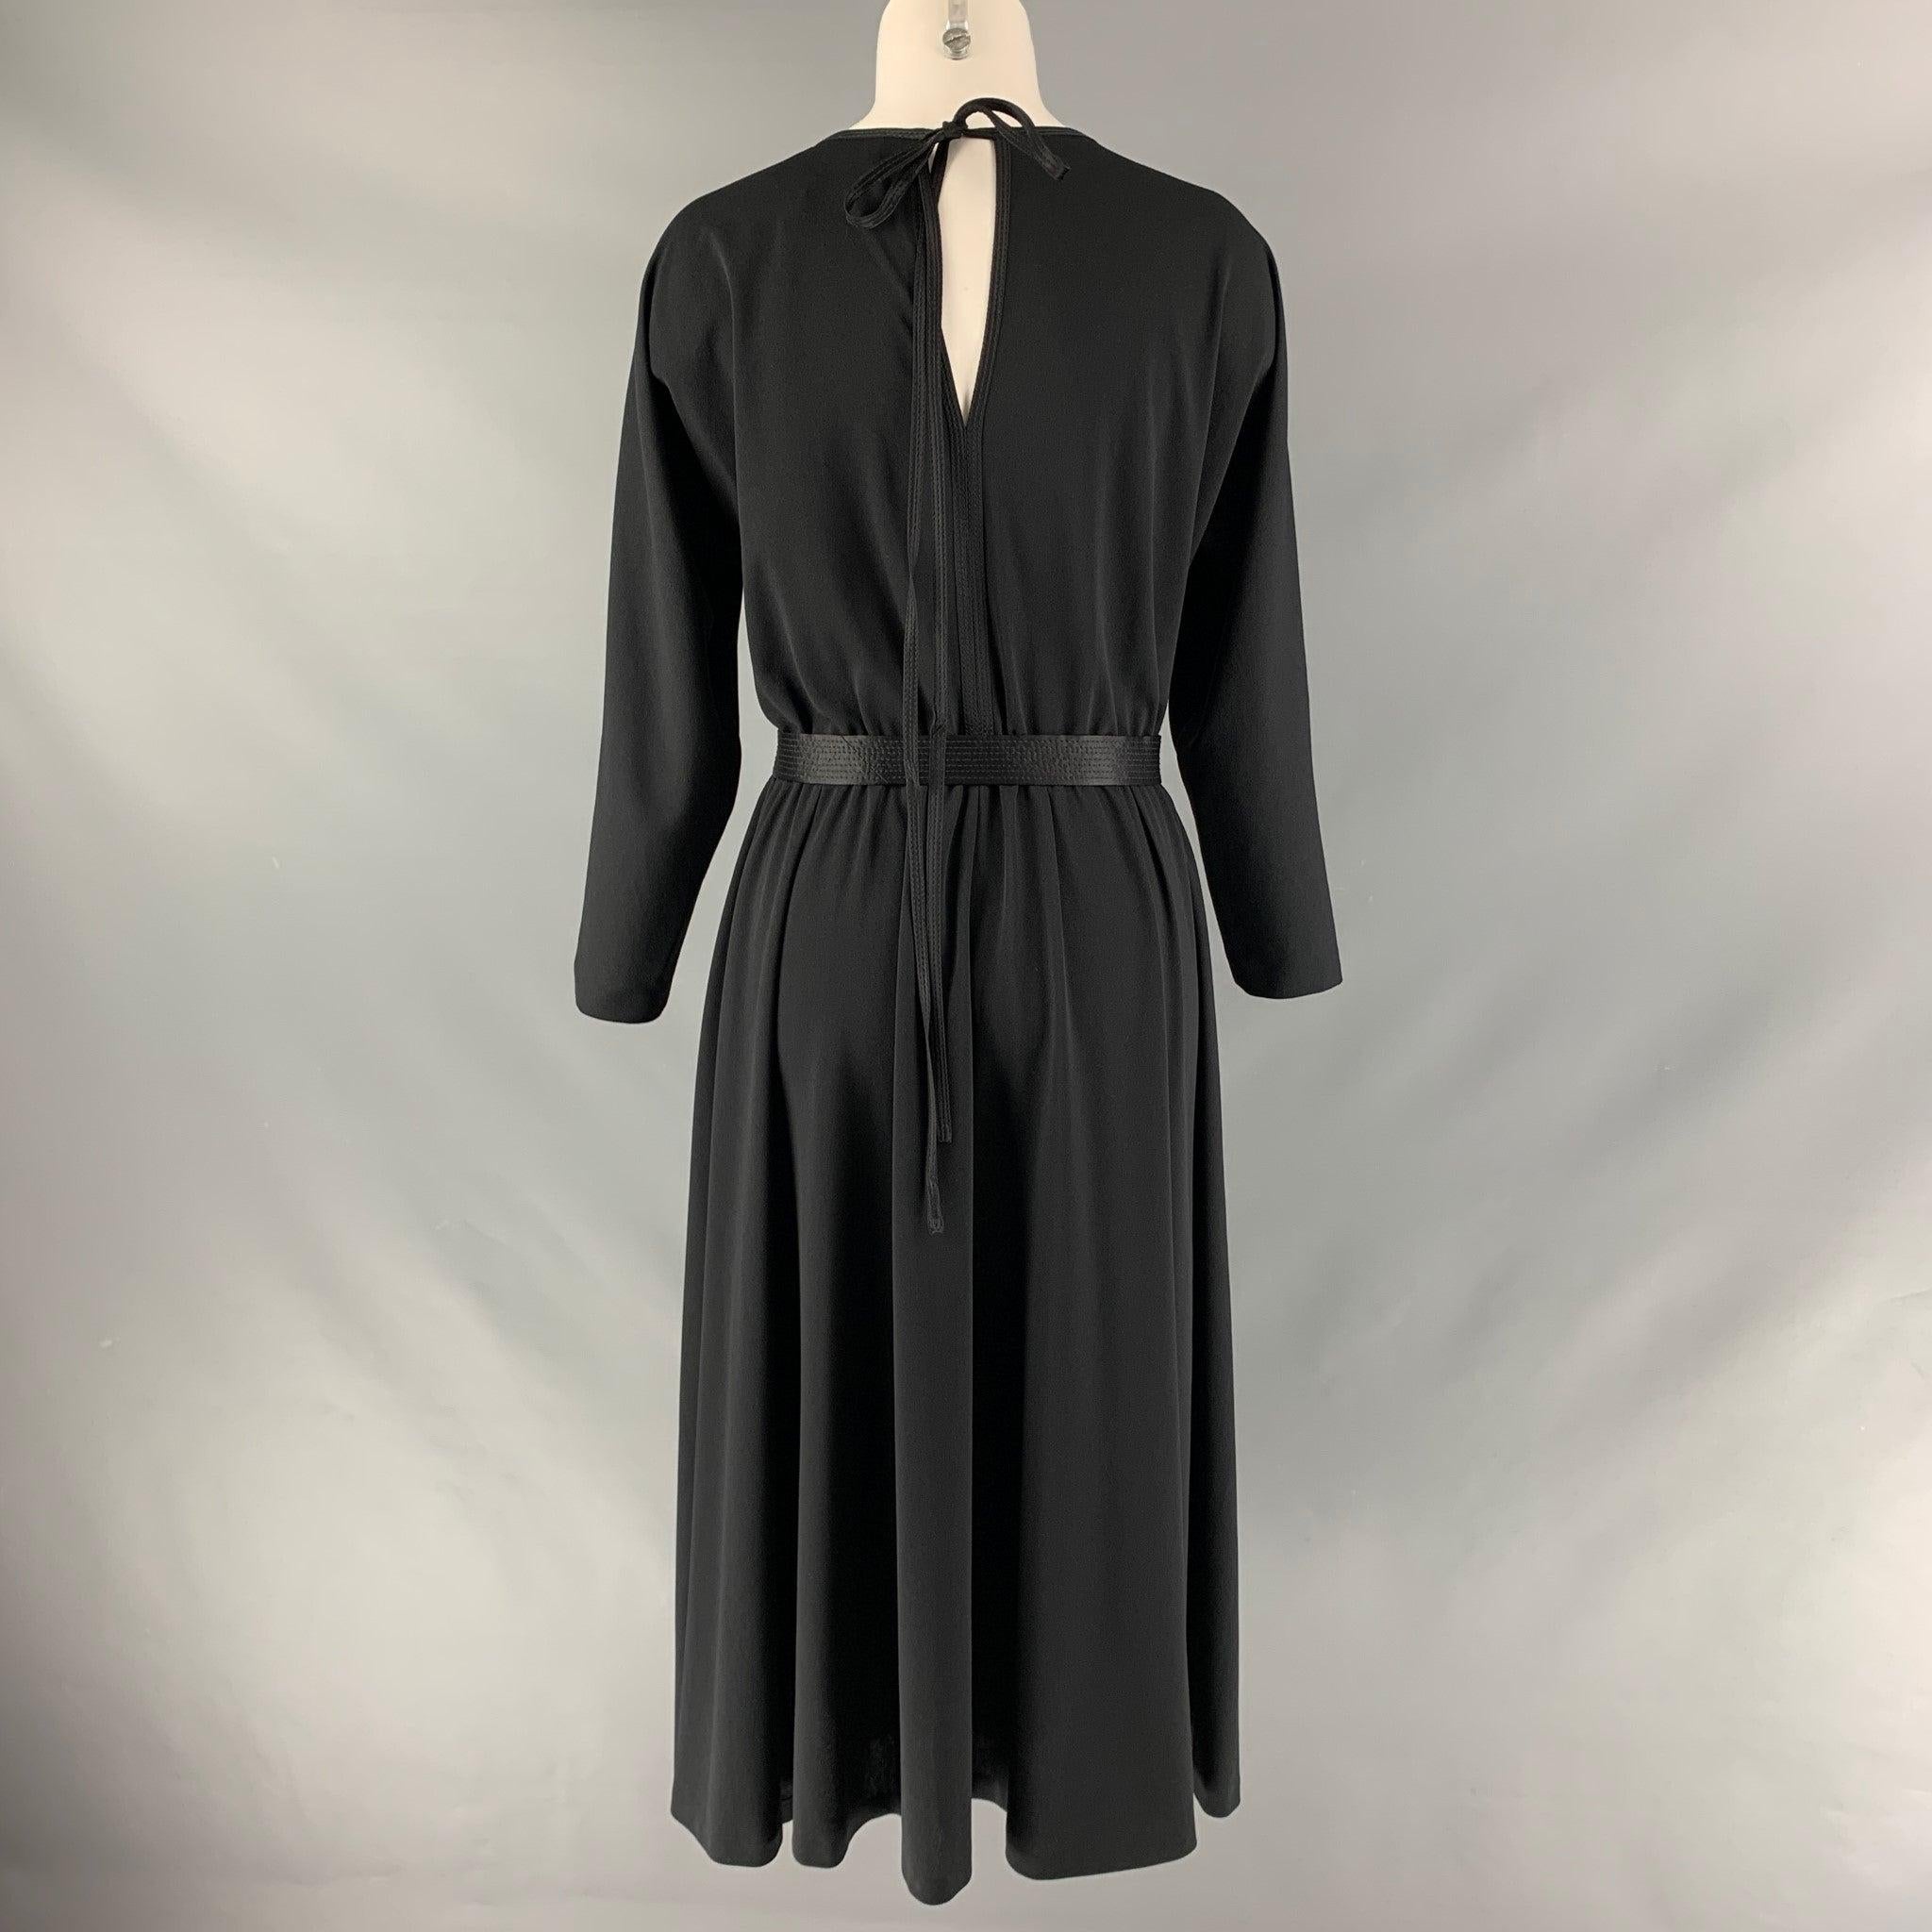 MARC JACOBS Size 4 Black Polyester Solid Belted Dress In Excellent Condition For Sale In San Francisco, CA